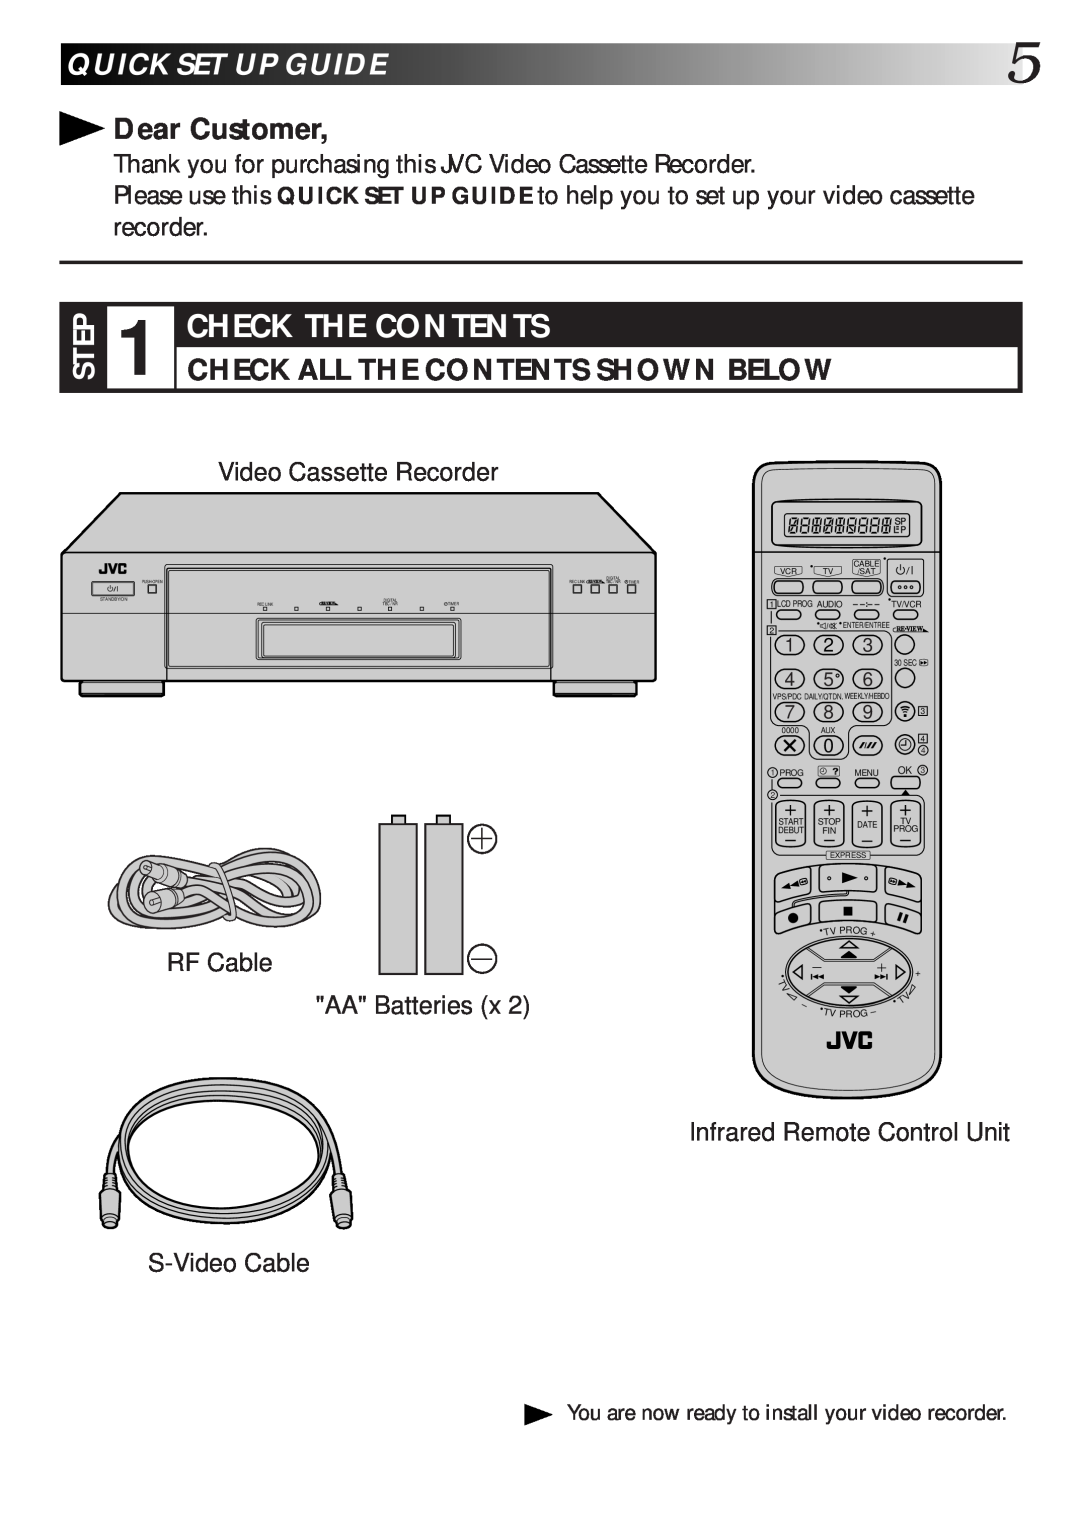 JVC HR-S9600EK QUICKSETUPGUIDE5, Dear Customer, Step, Check The Contents, Check All The Contents Shown Below, Prog 